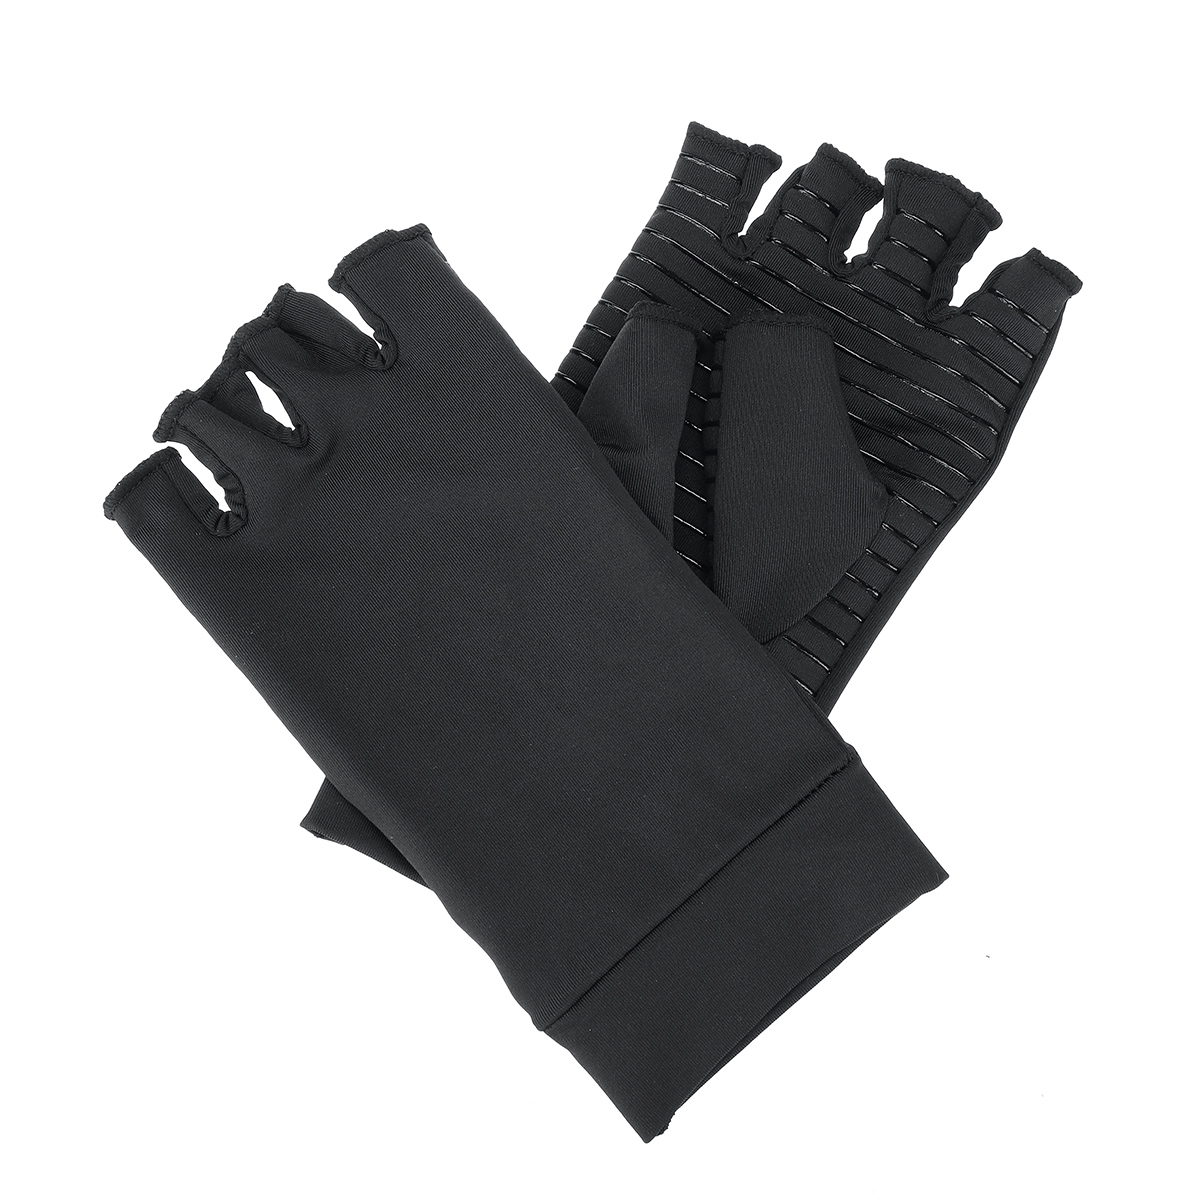 1-Pair-Compression-Gloves-with-Copper-for-Arthritis-RheumatoidRelief-Pain-and-SwellingOsteoarthritis-1755584-8